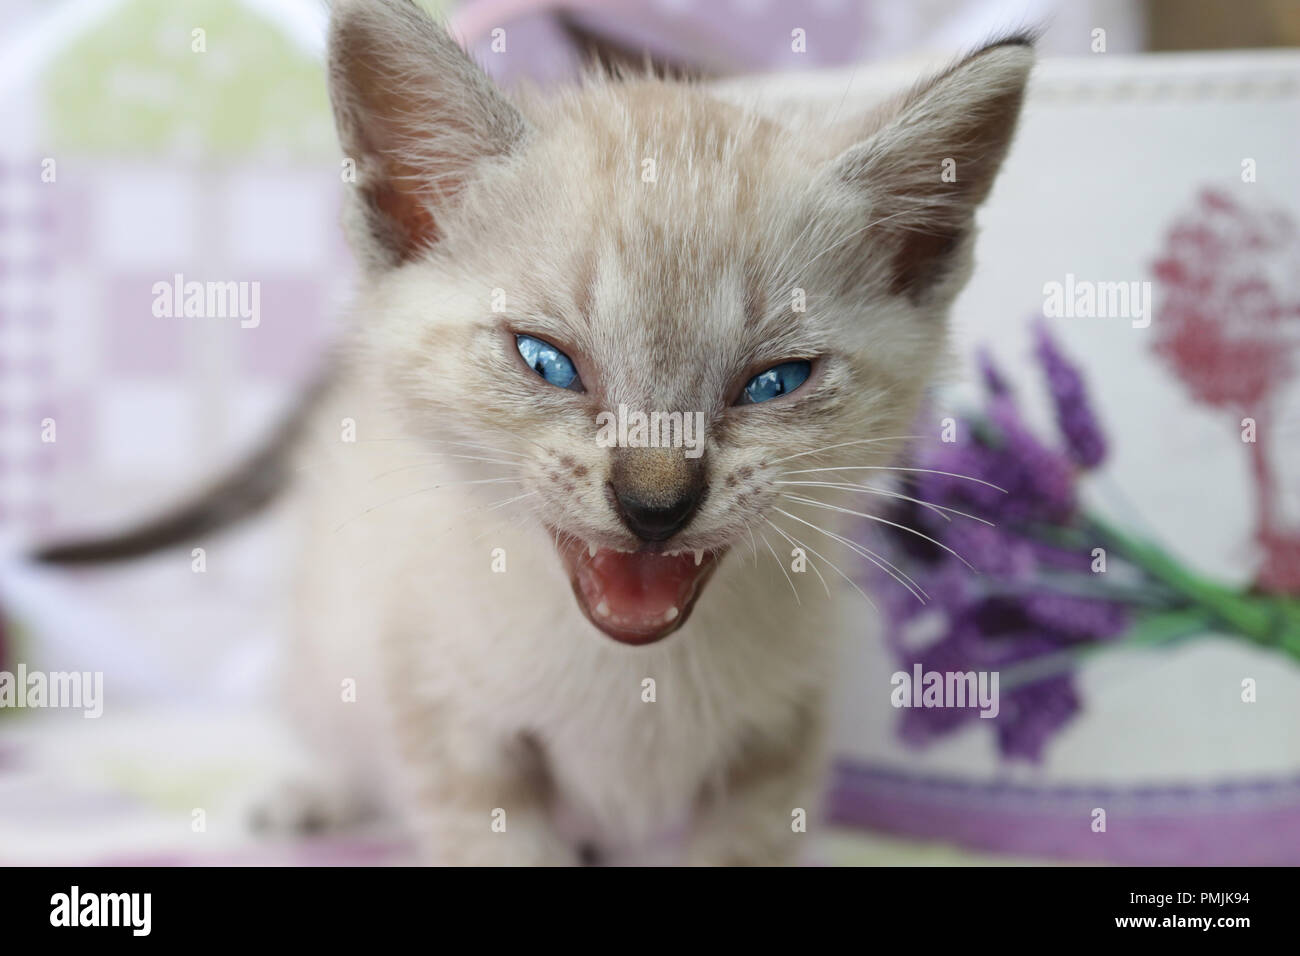 kitten, 5 weeks old, seal tabby point, give a funny yawn Stock Photo